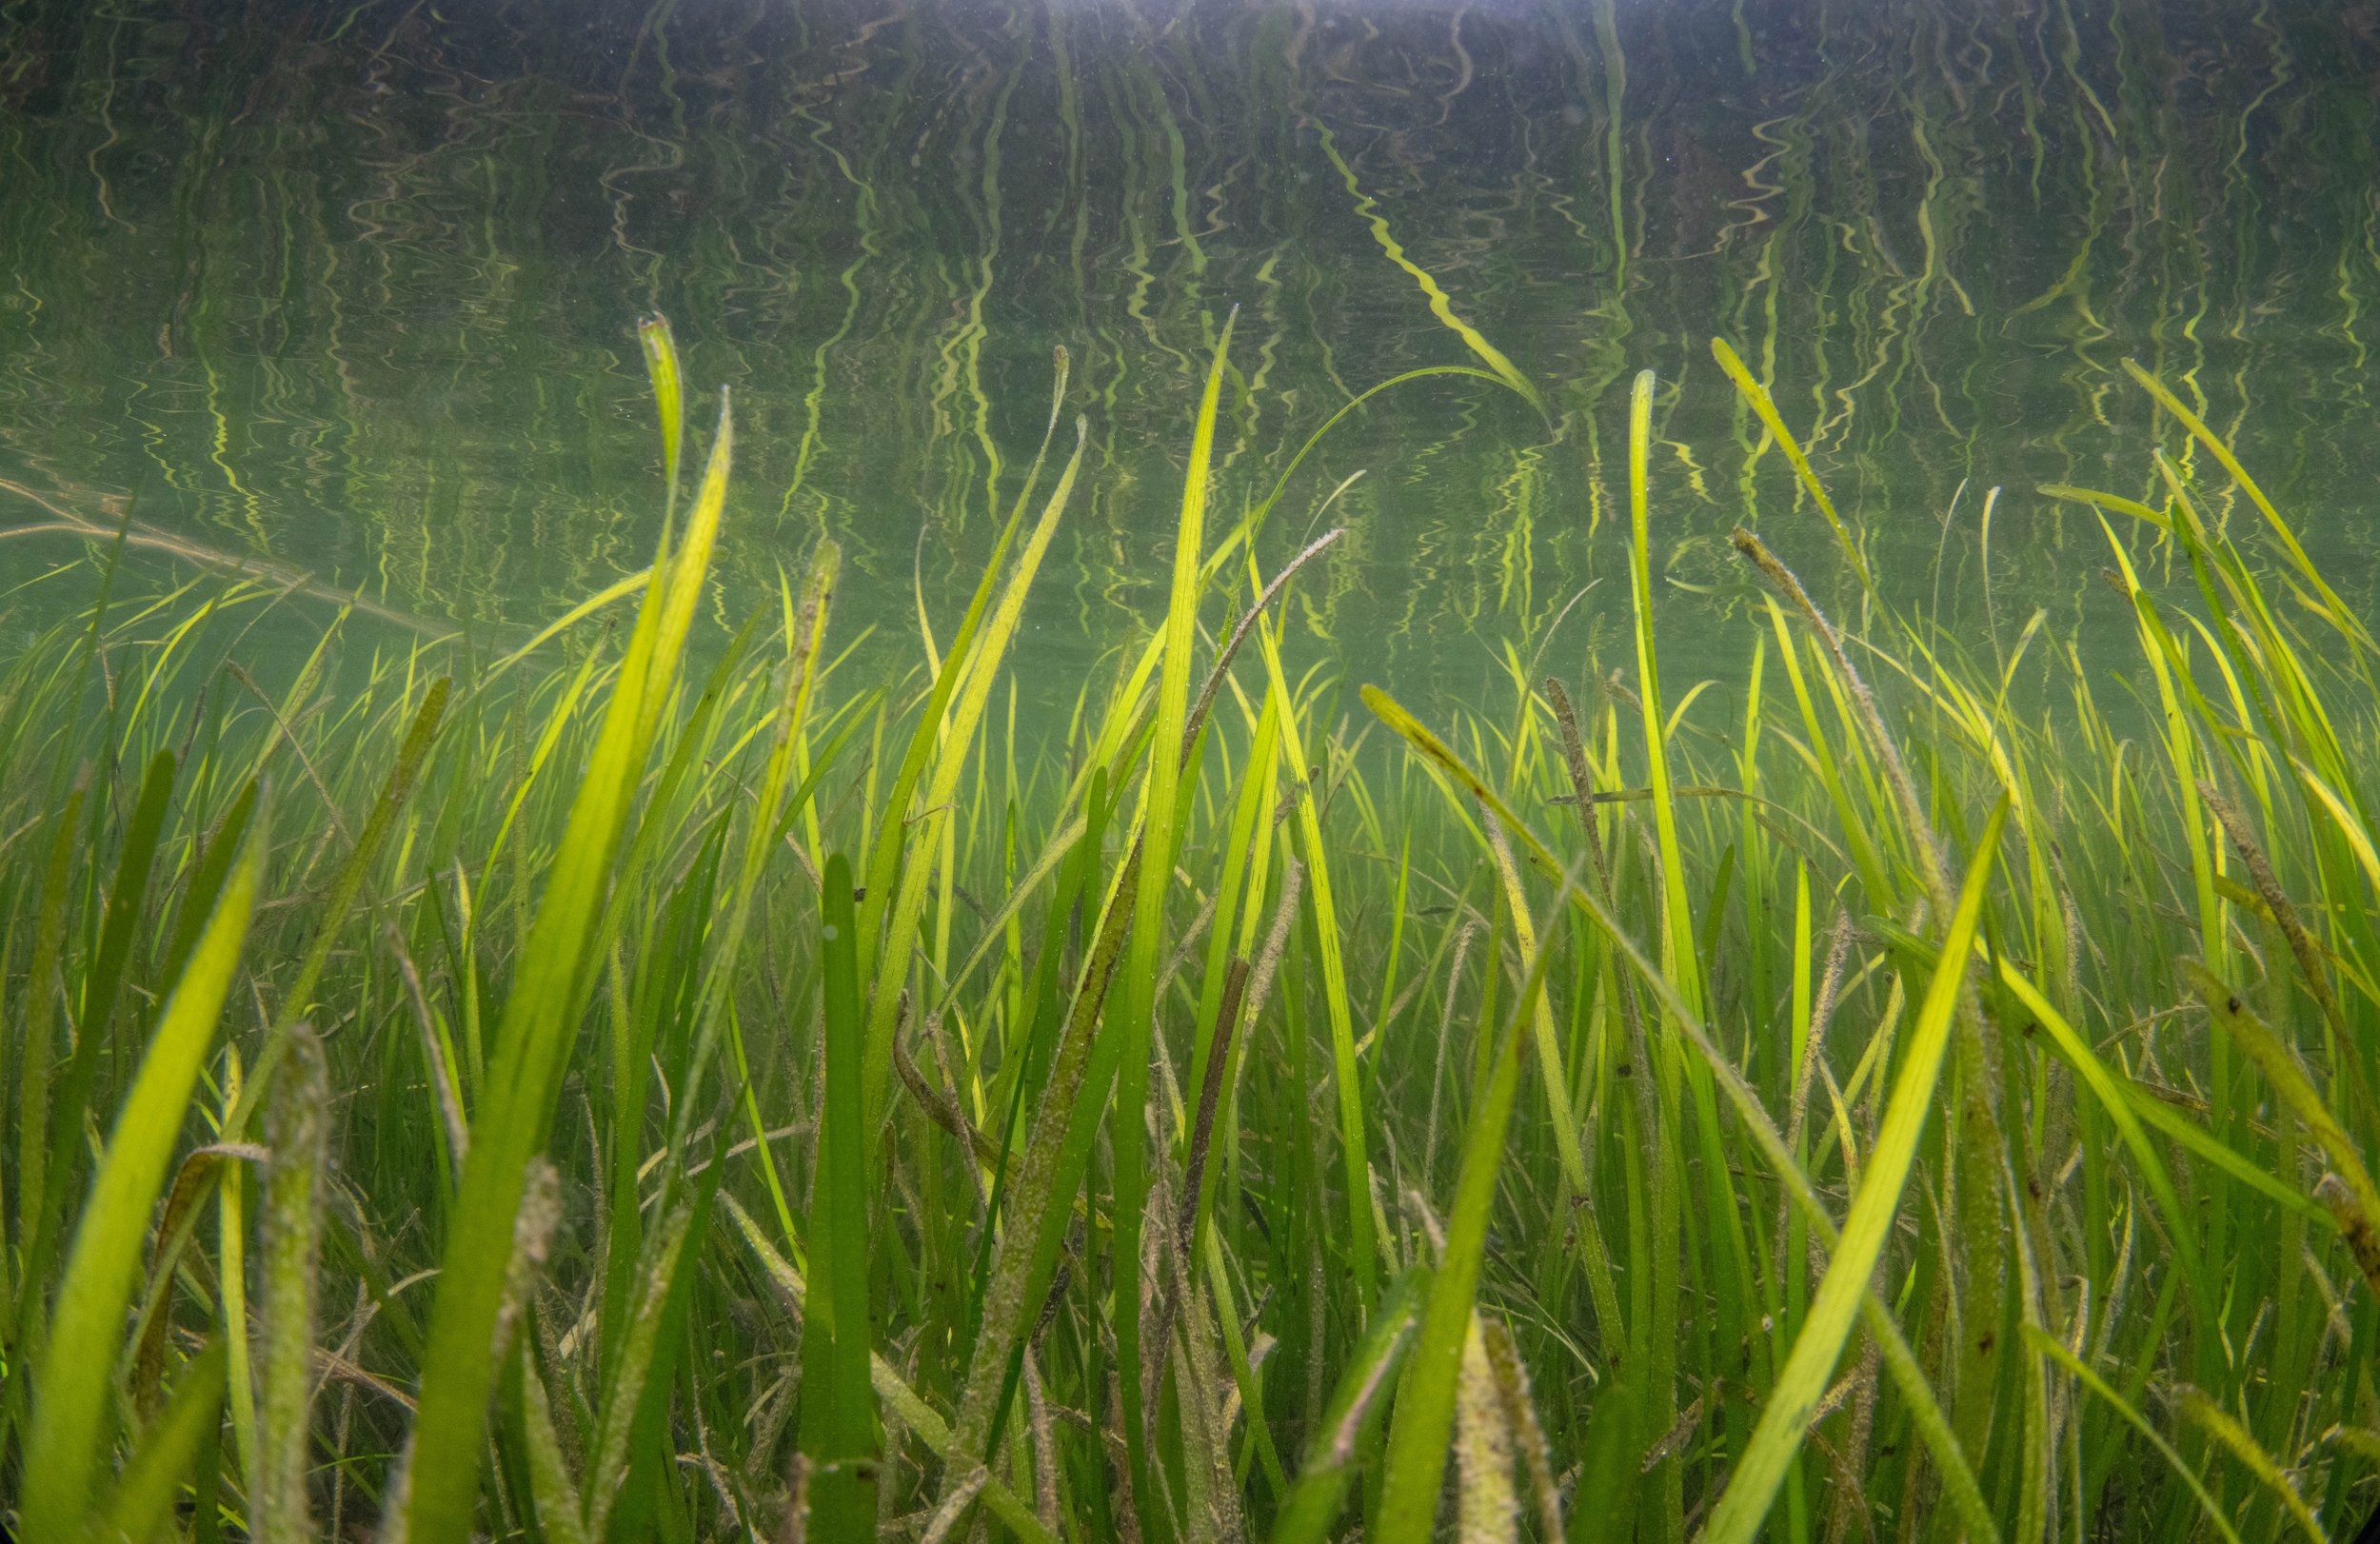  A seagrass meadow in Orkney. Photo by Raymond Besant. 